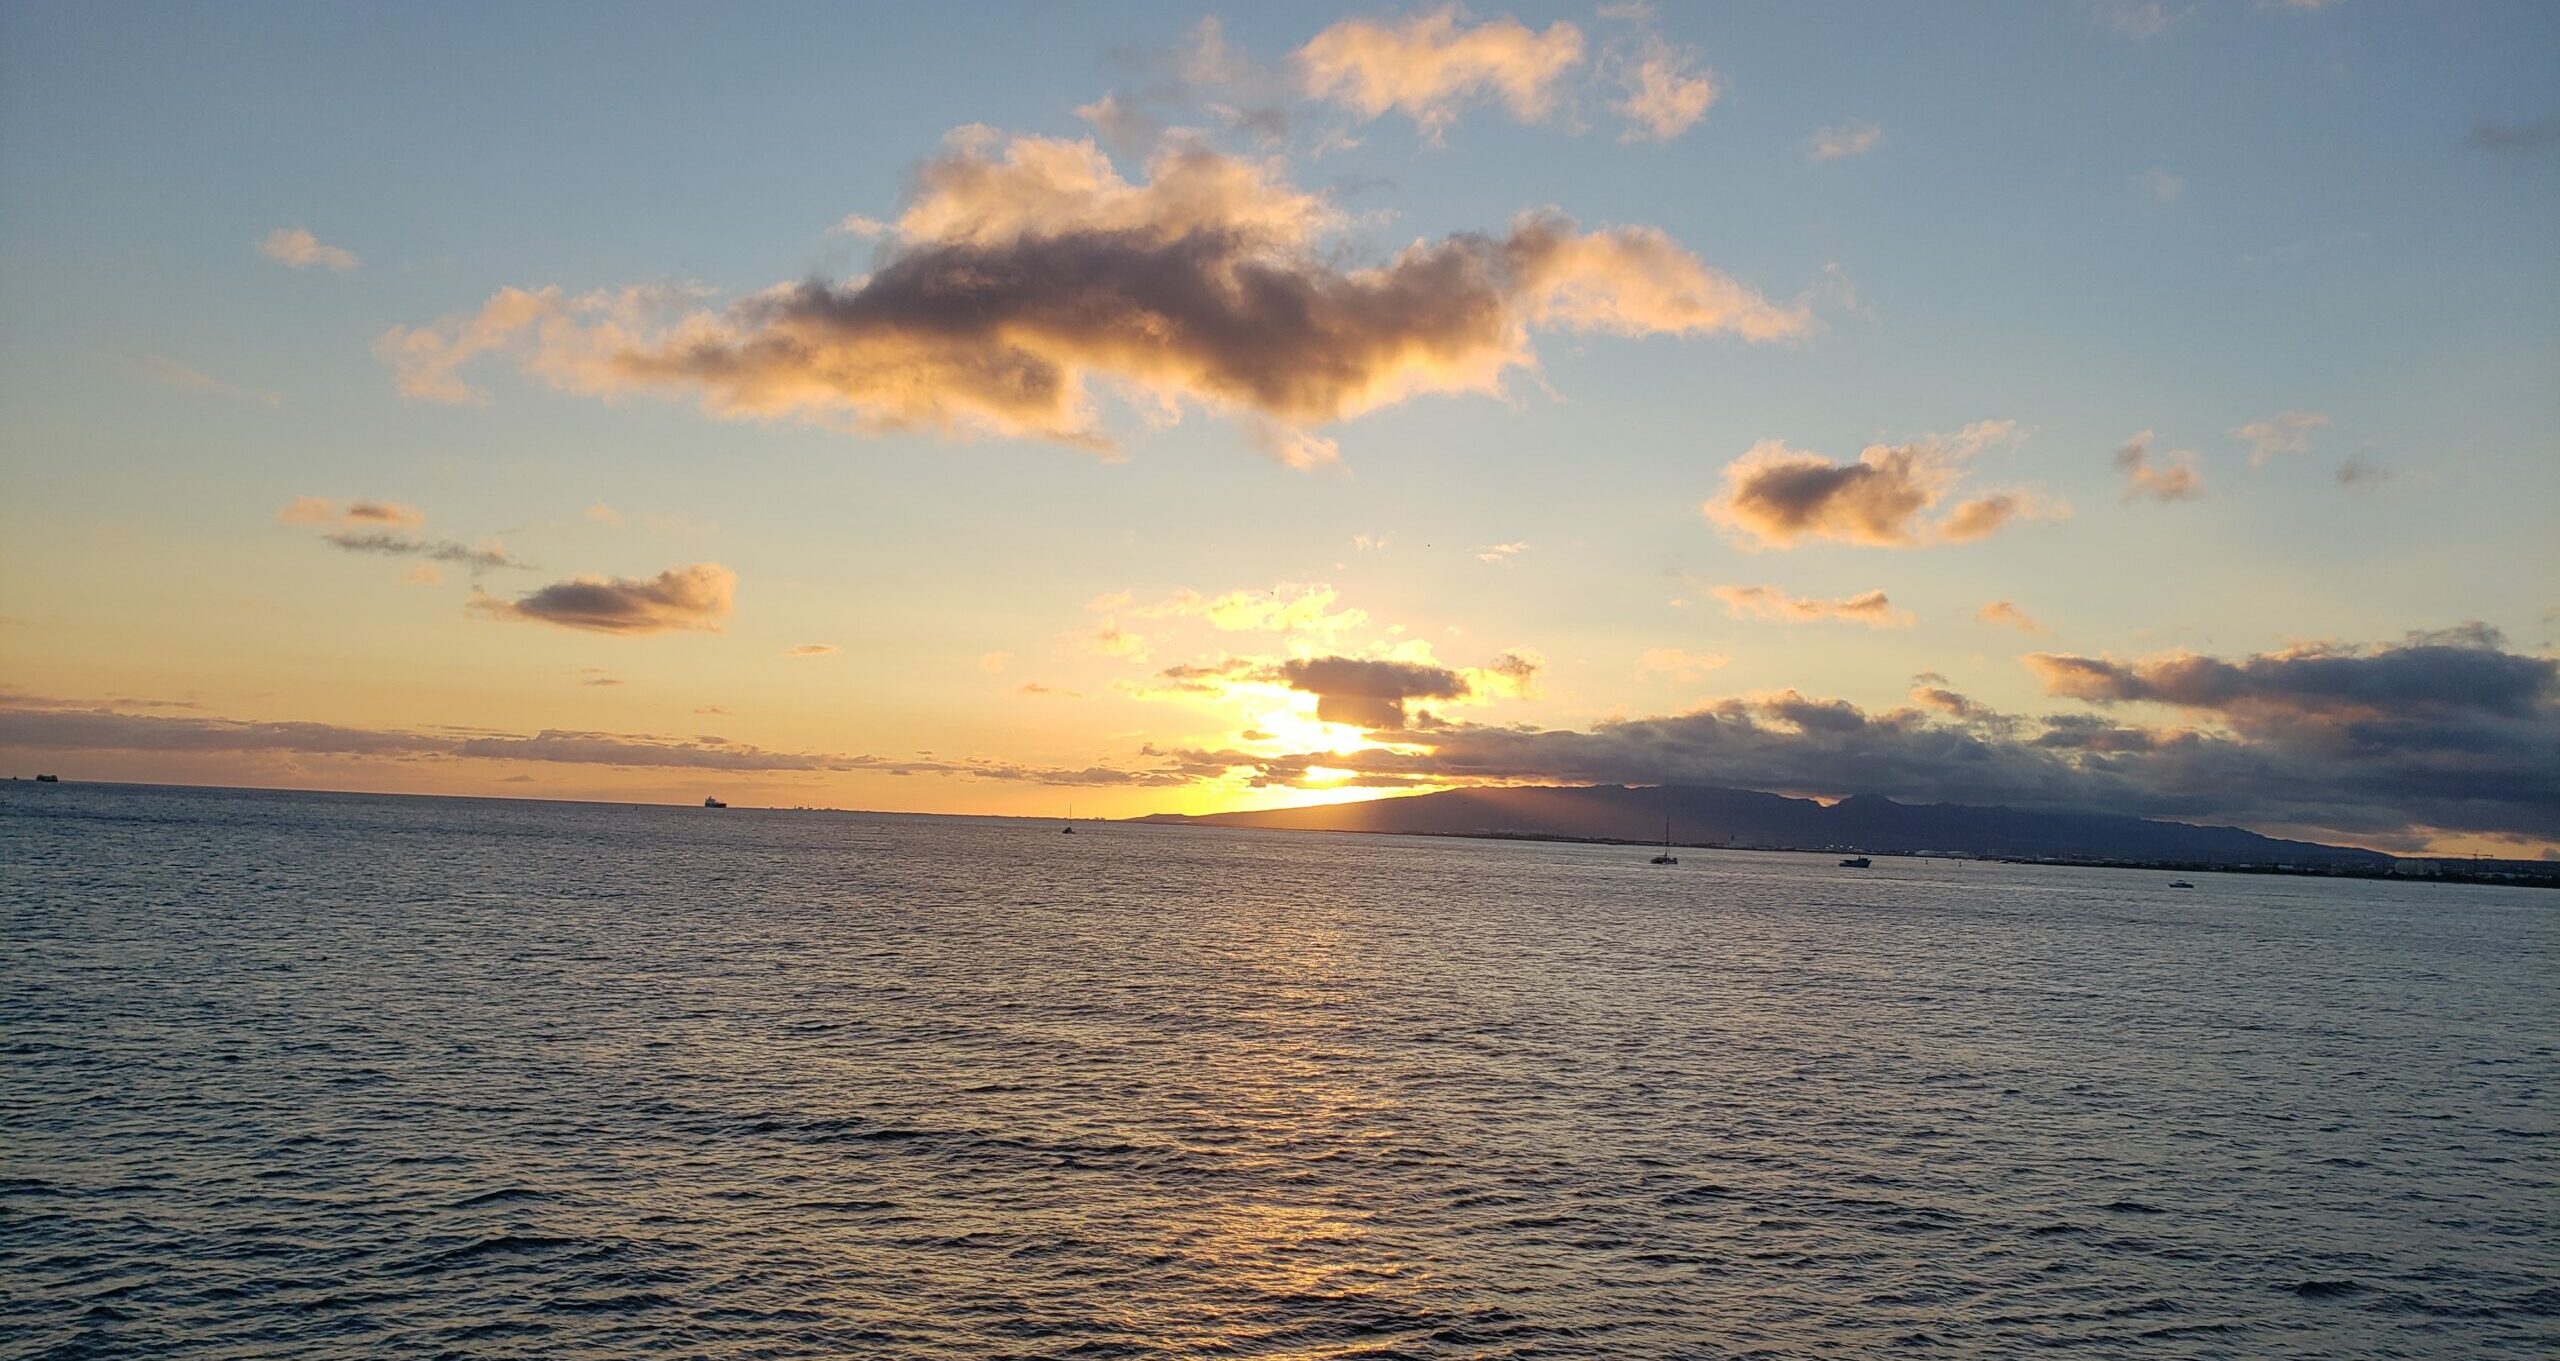 The sun sets over Waikiki Bay, taken from the deck of the Star of Honolulu dinner cruise